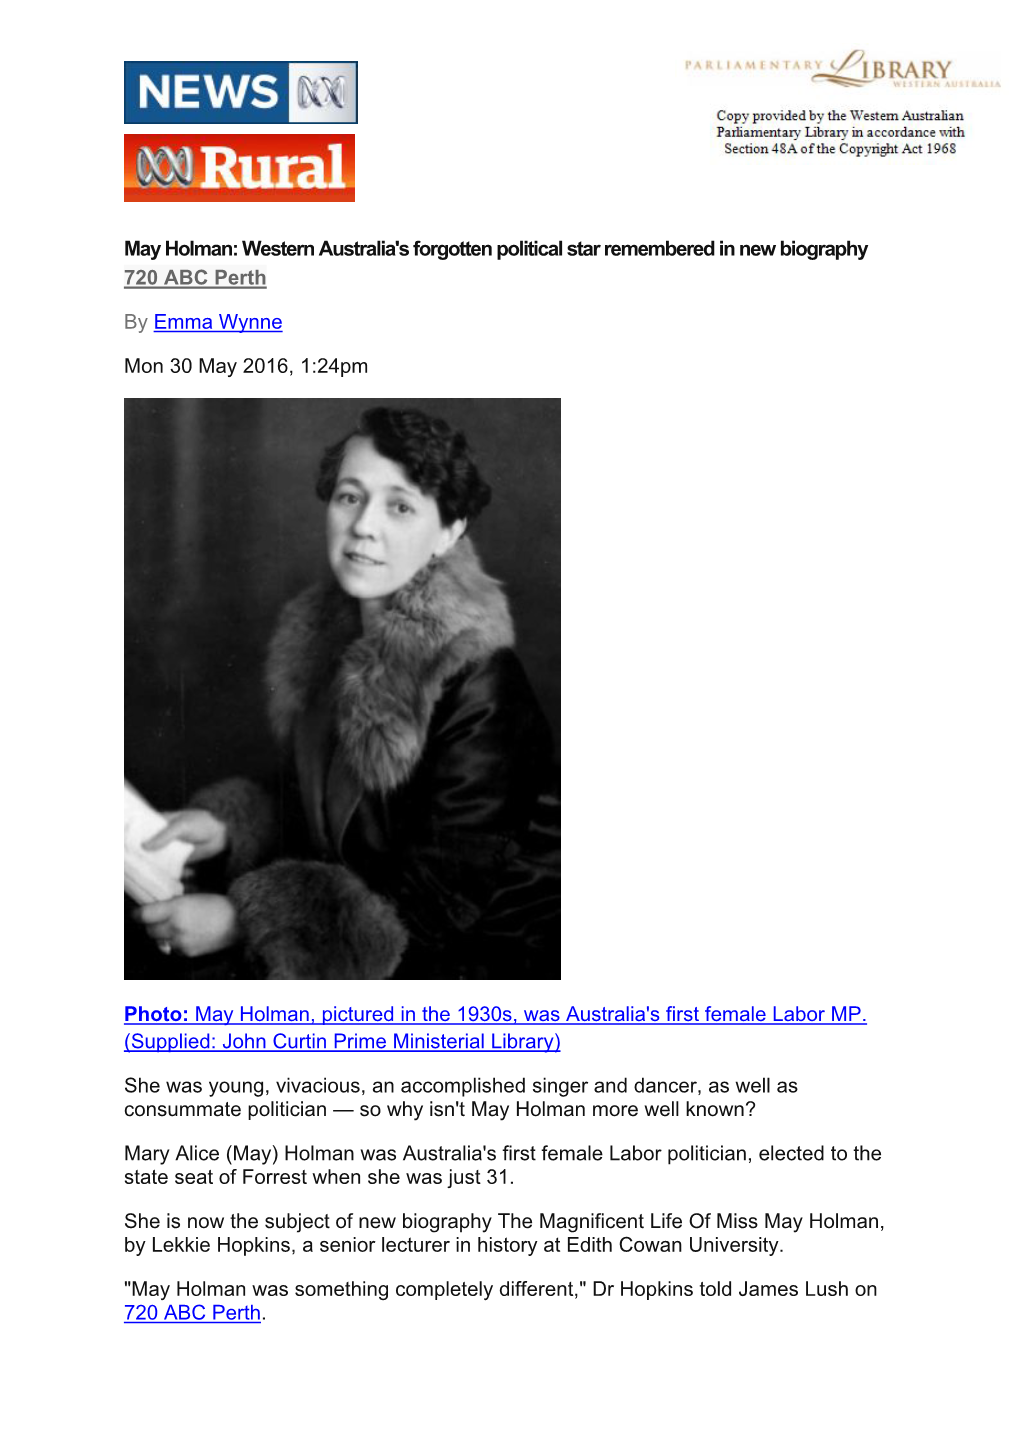 May Holman: Western Australia's Forgotten Political Star Remembered in New Biography 720 ABC Perth by Emma Wynne Mon 30 May 2016